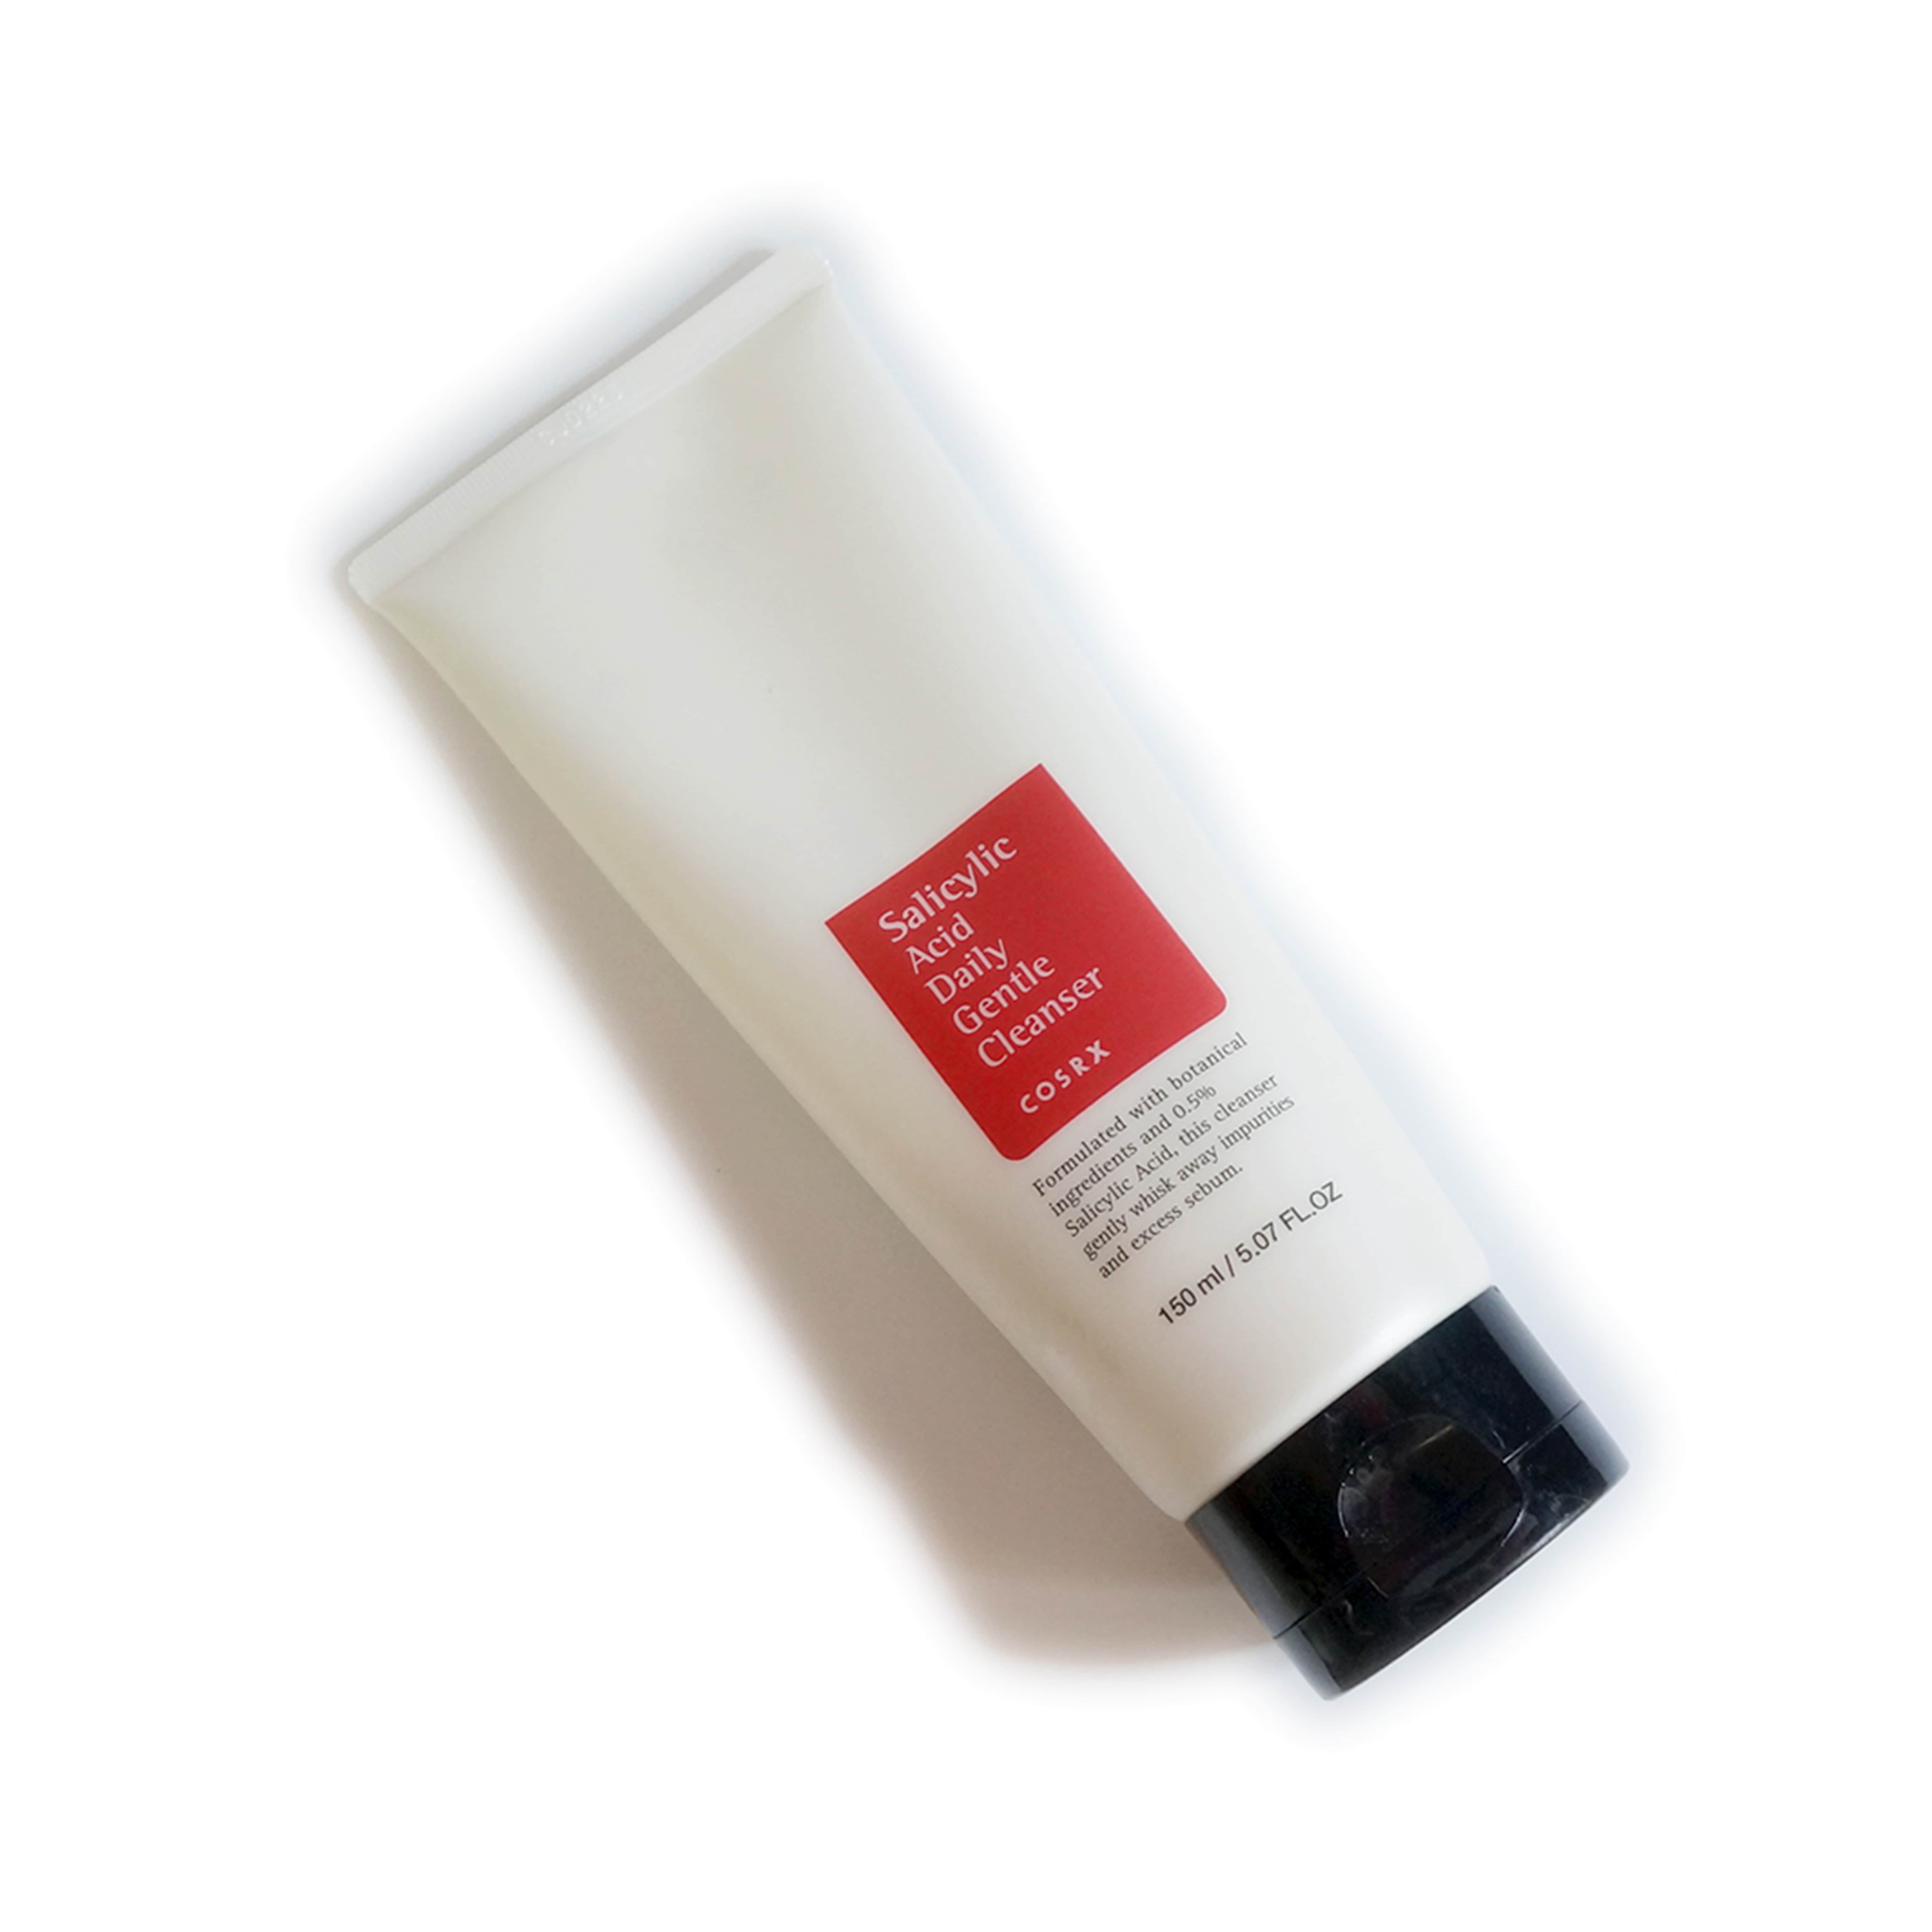 Experience the excitement of flawless skin with our Salicylic Acid Daily Gentle Cleanser